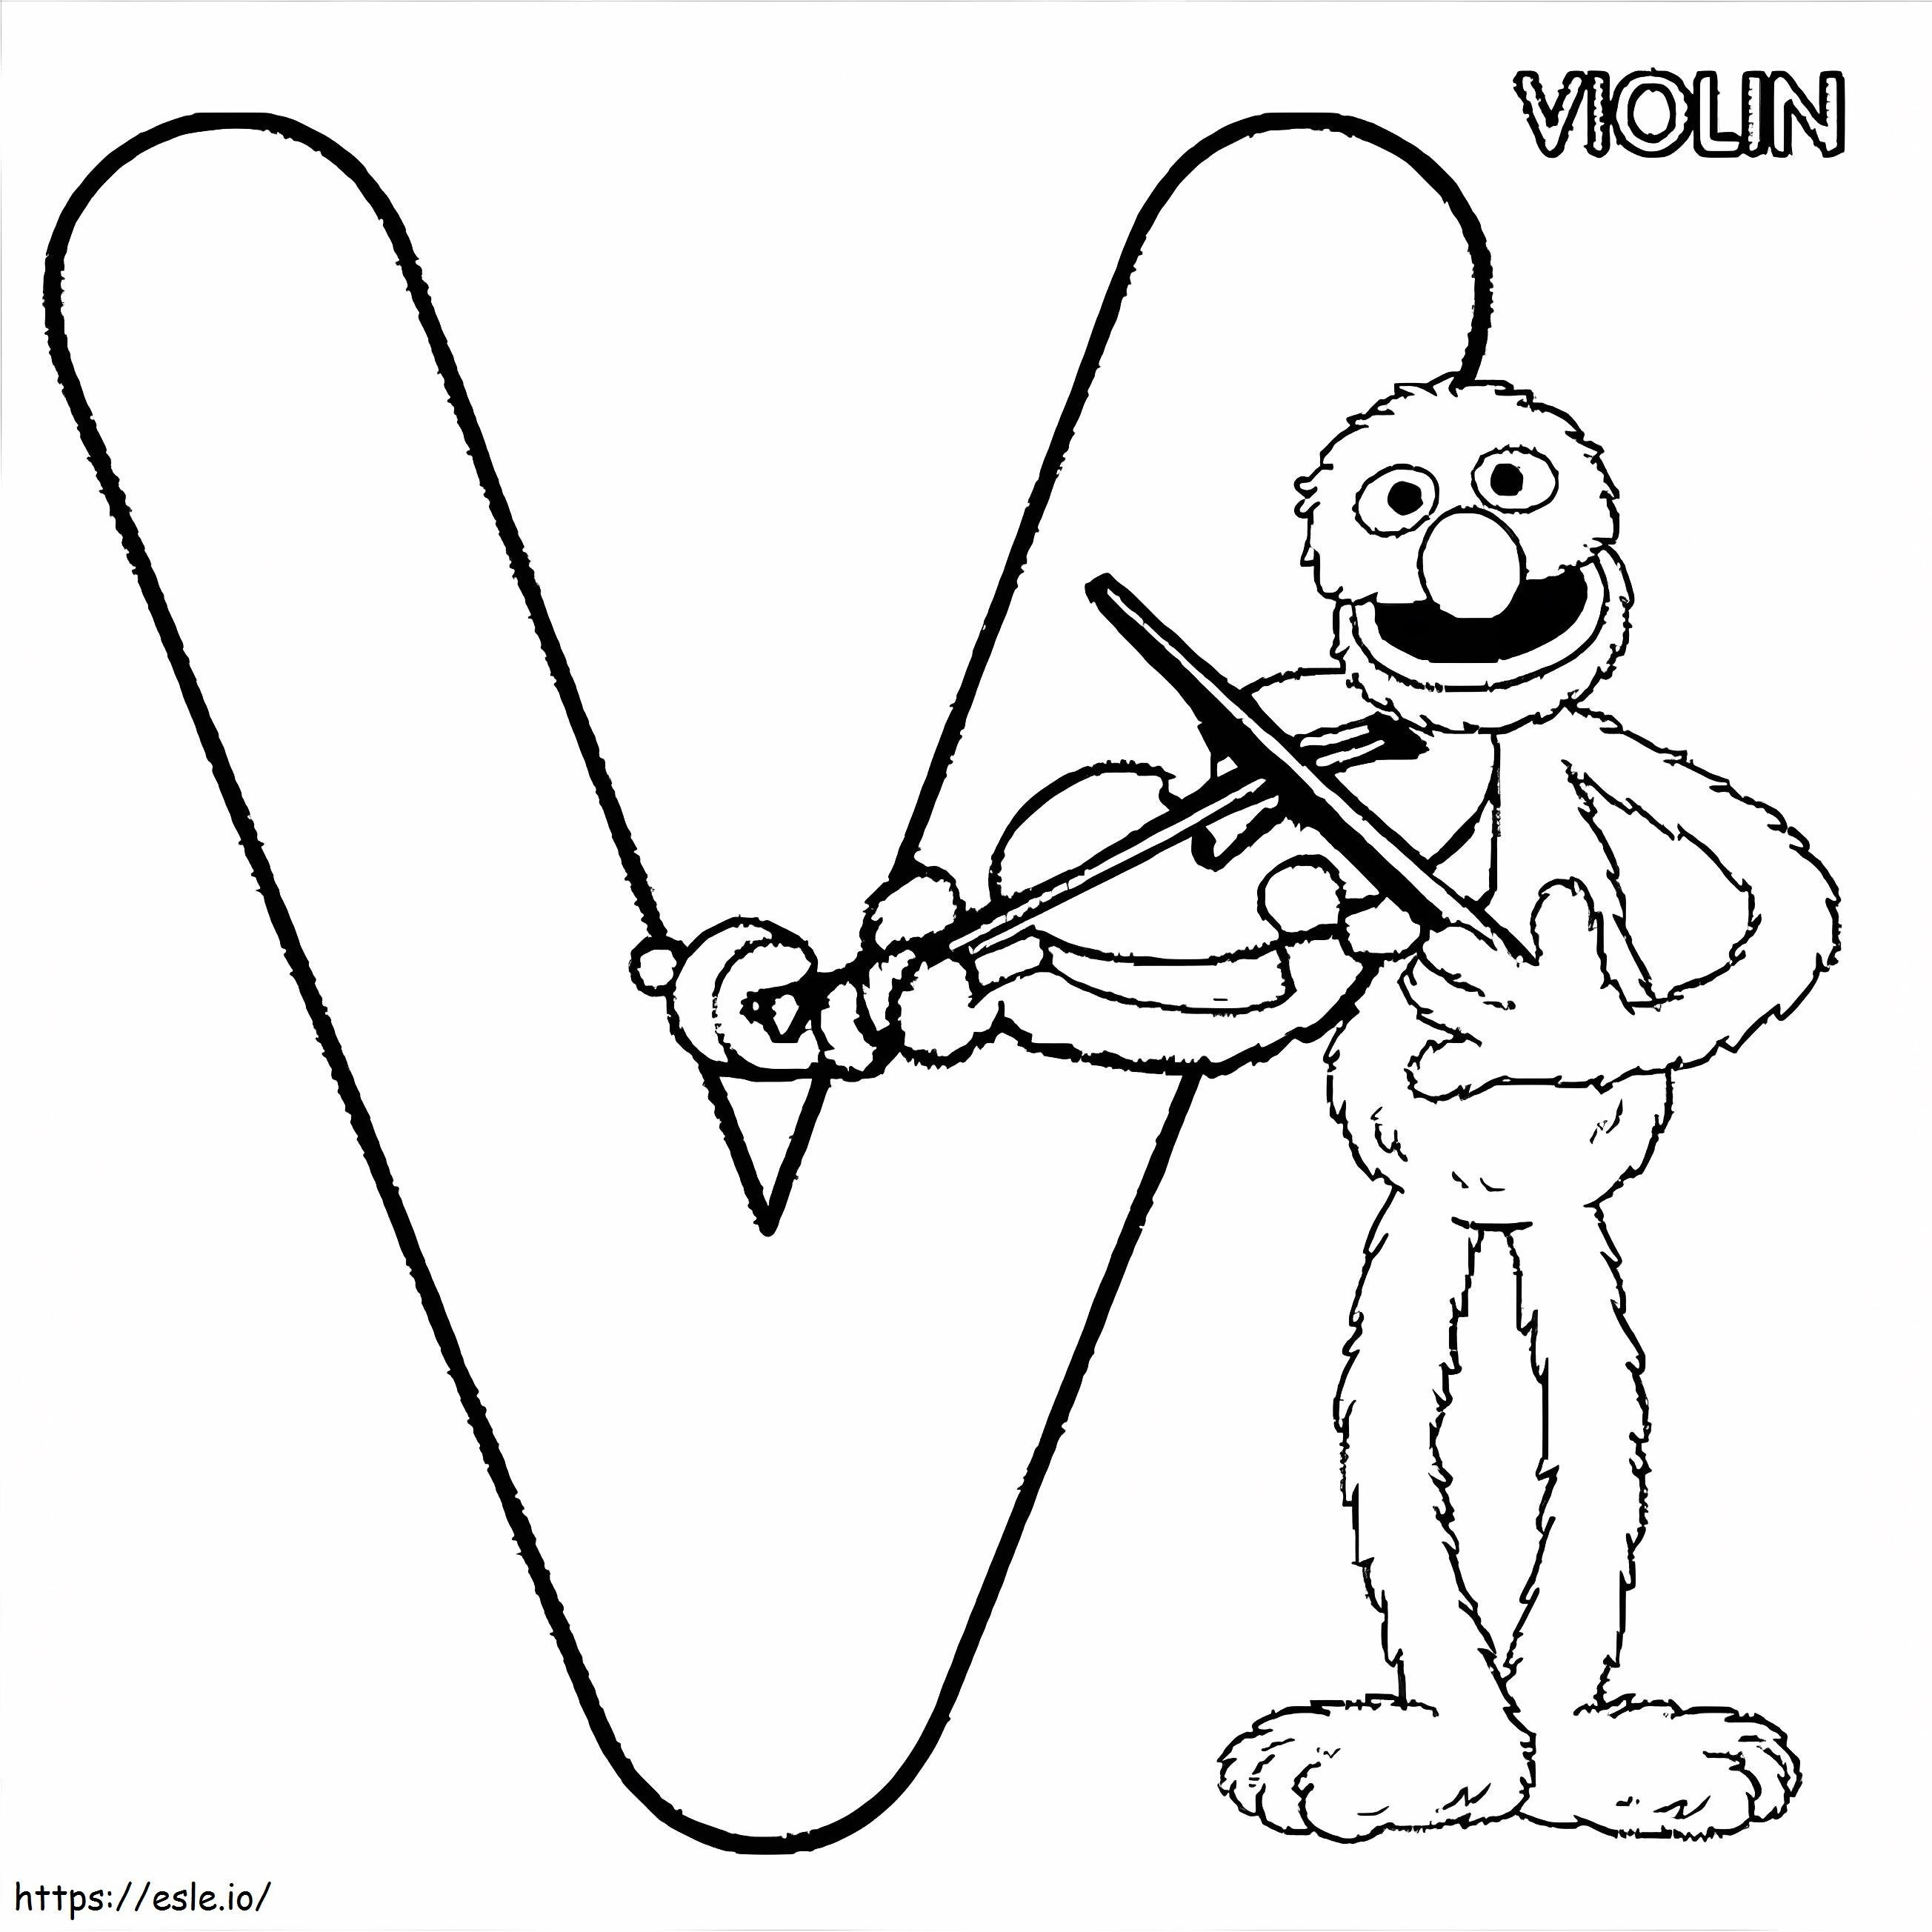 Grover V For Violin coloring page